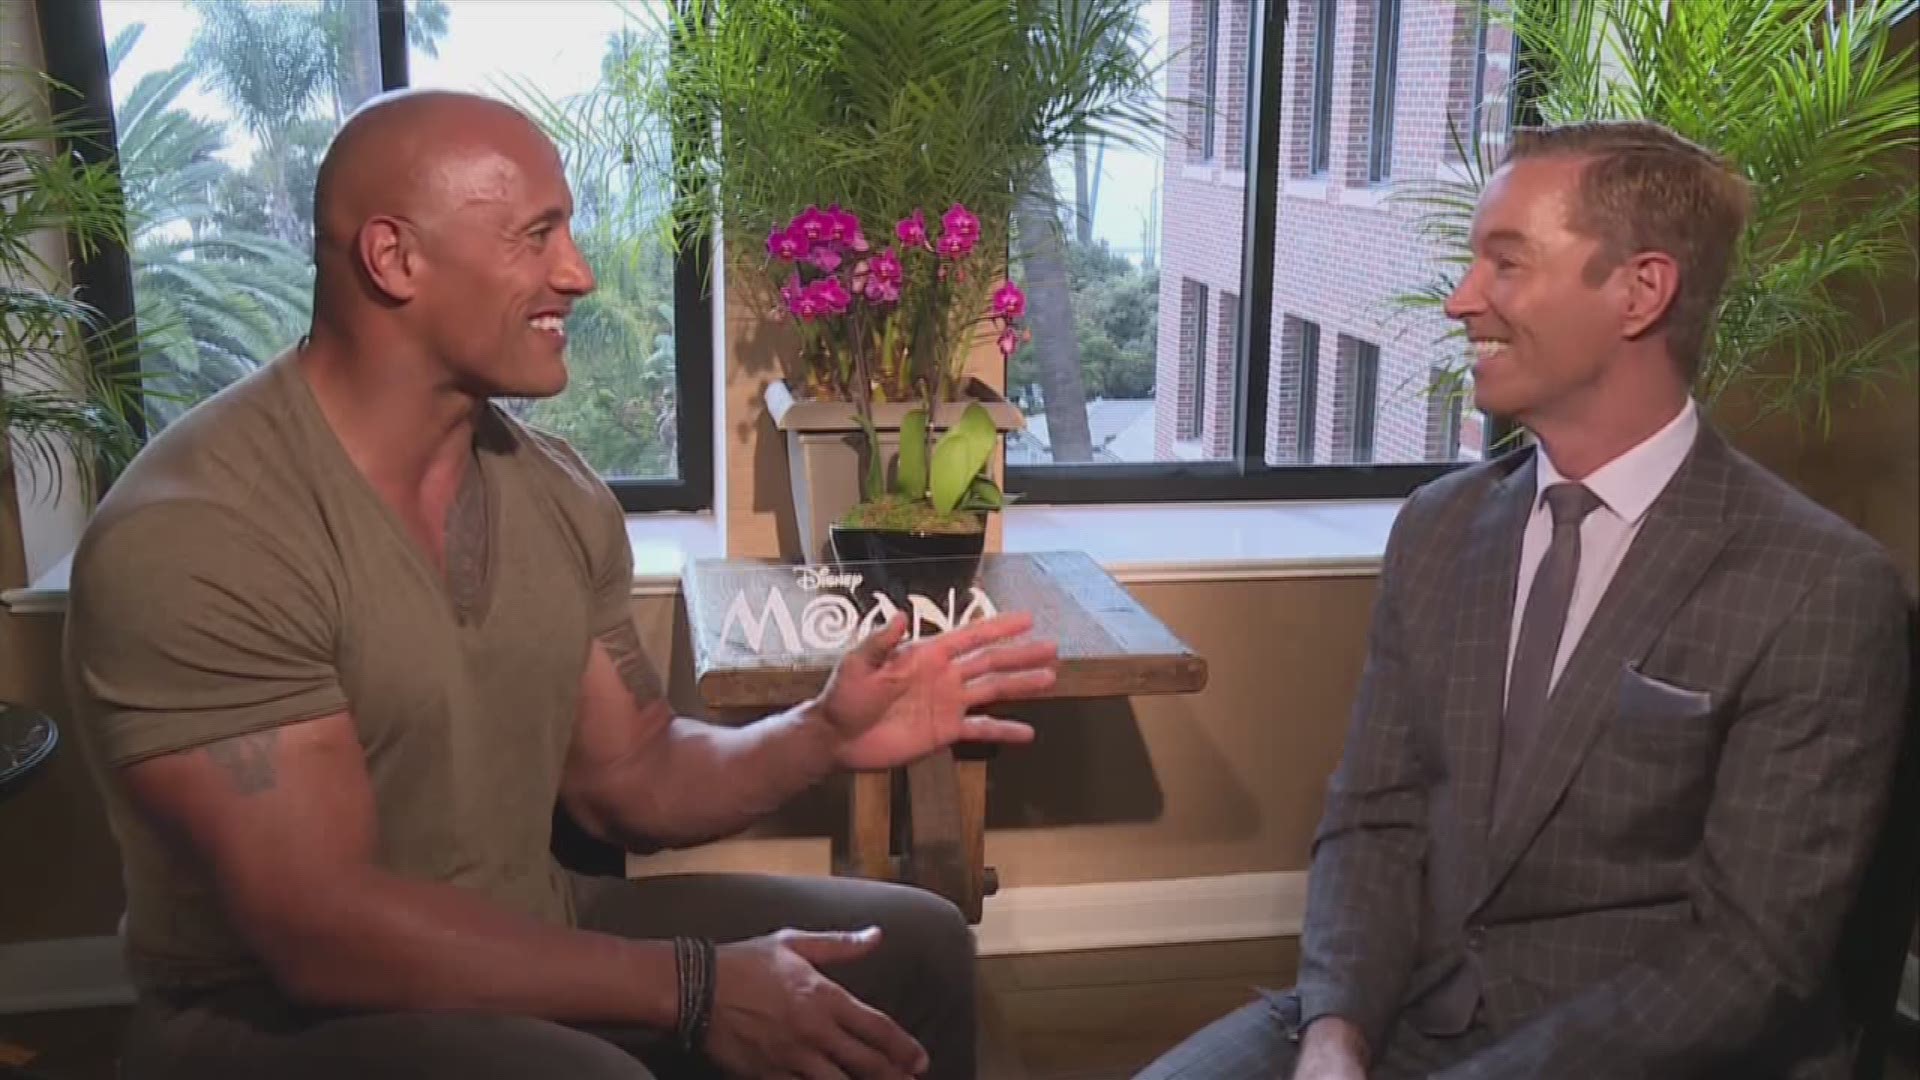 Mark S. Allen interviews Dwayne Johnson. ((Travel and accommodation costs paid by Walt Disney Studios Motion Pictures)